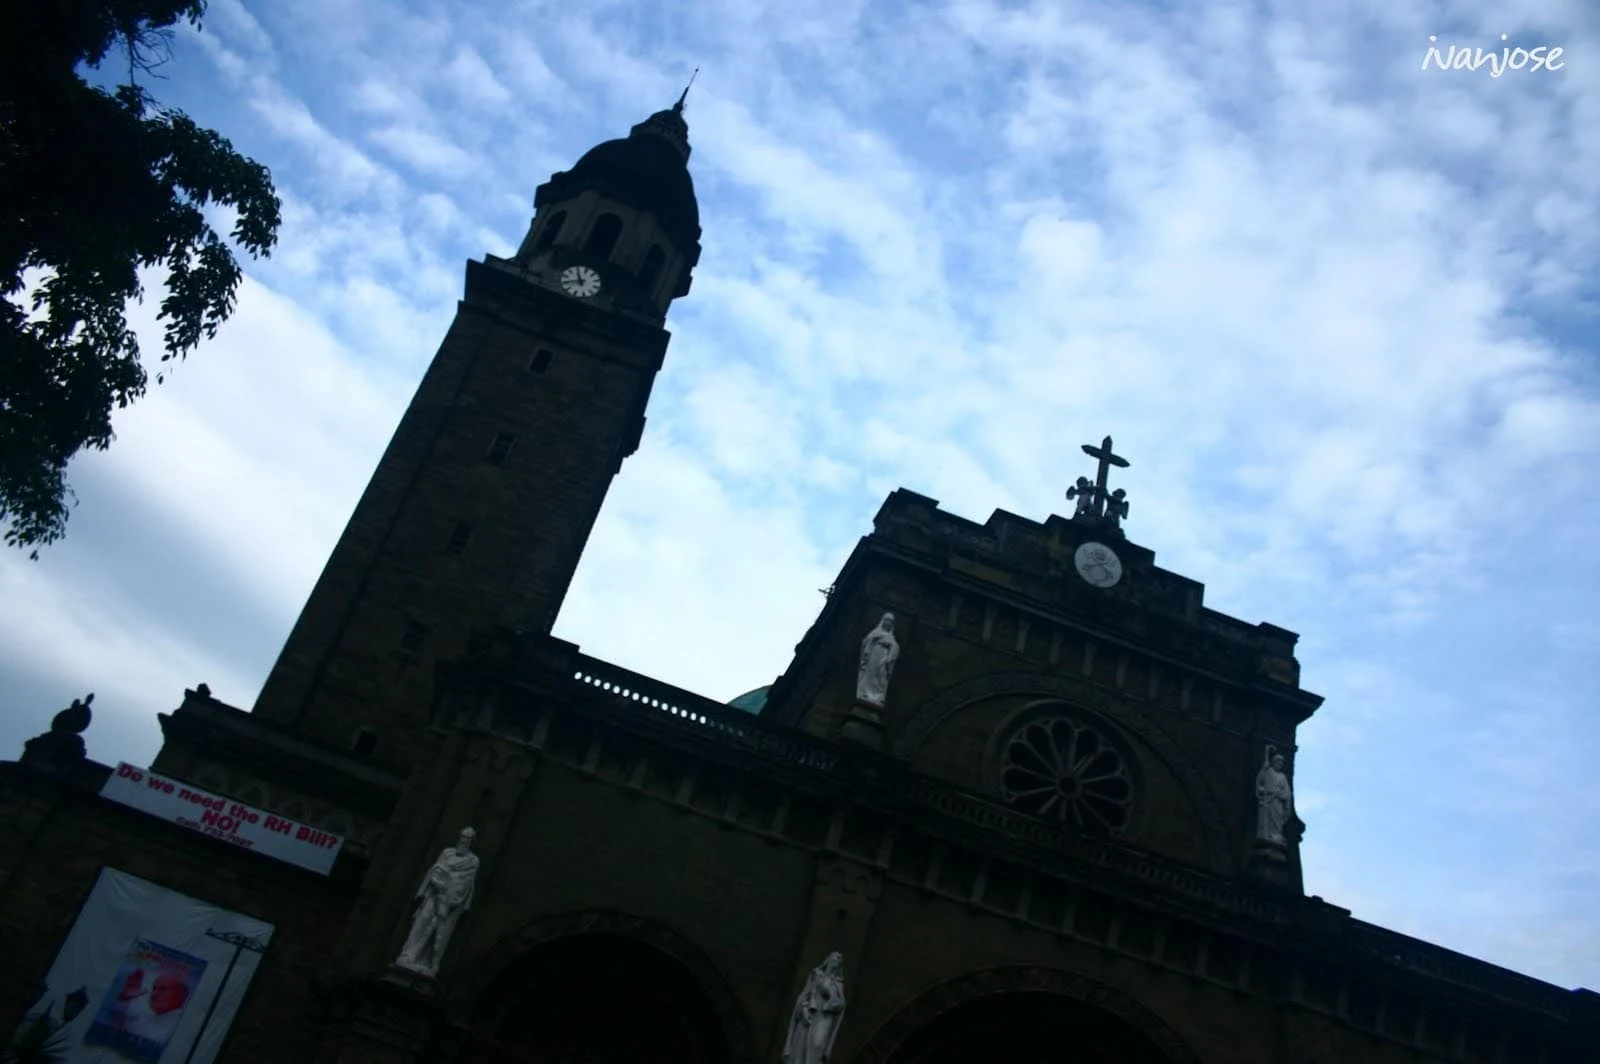 The silhouette of Manila Cathedral in Intramuros